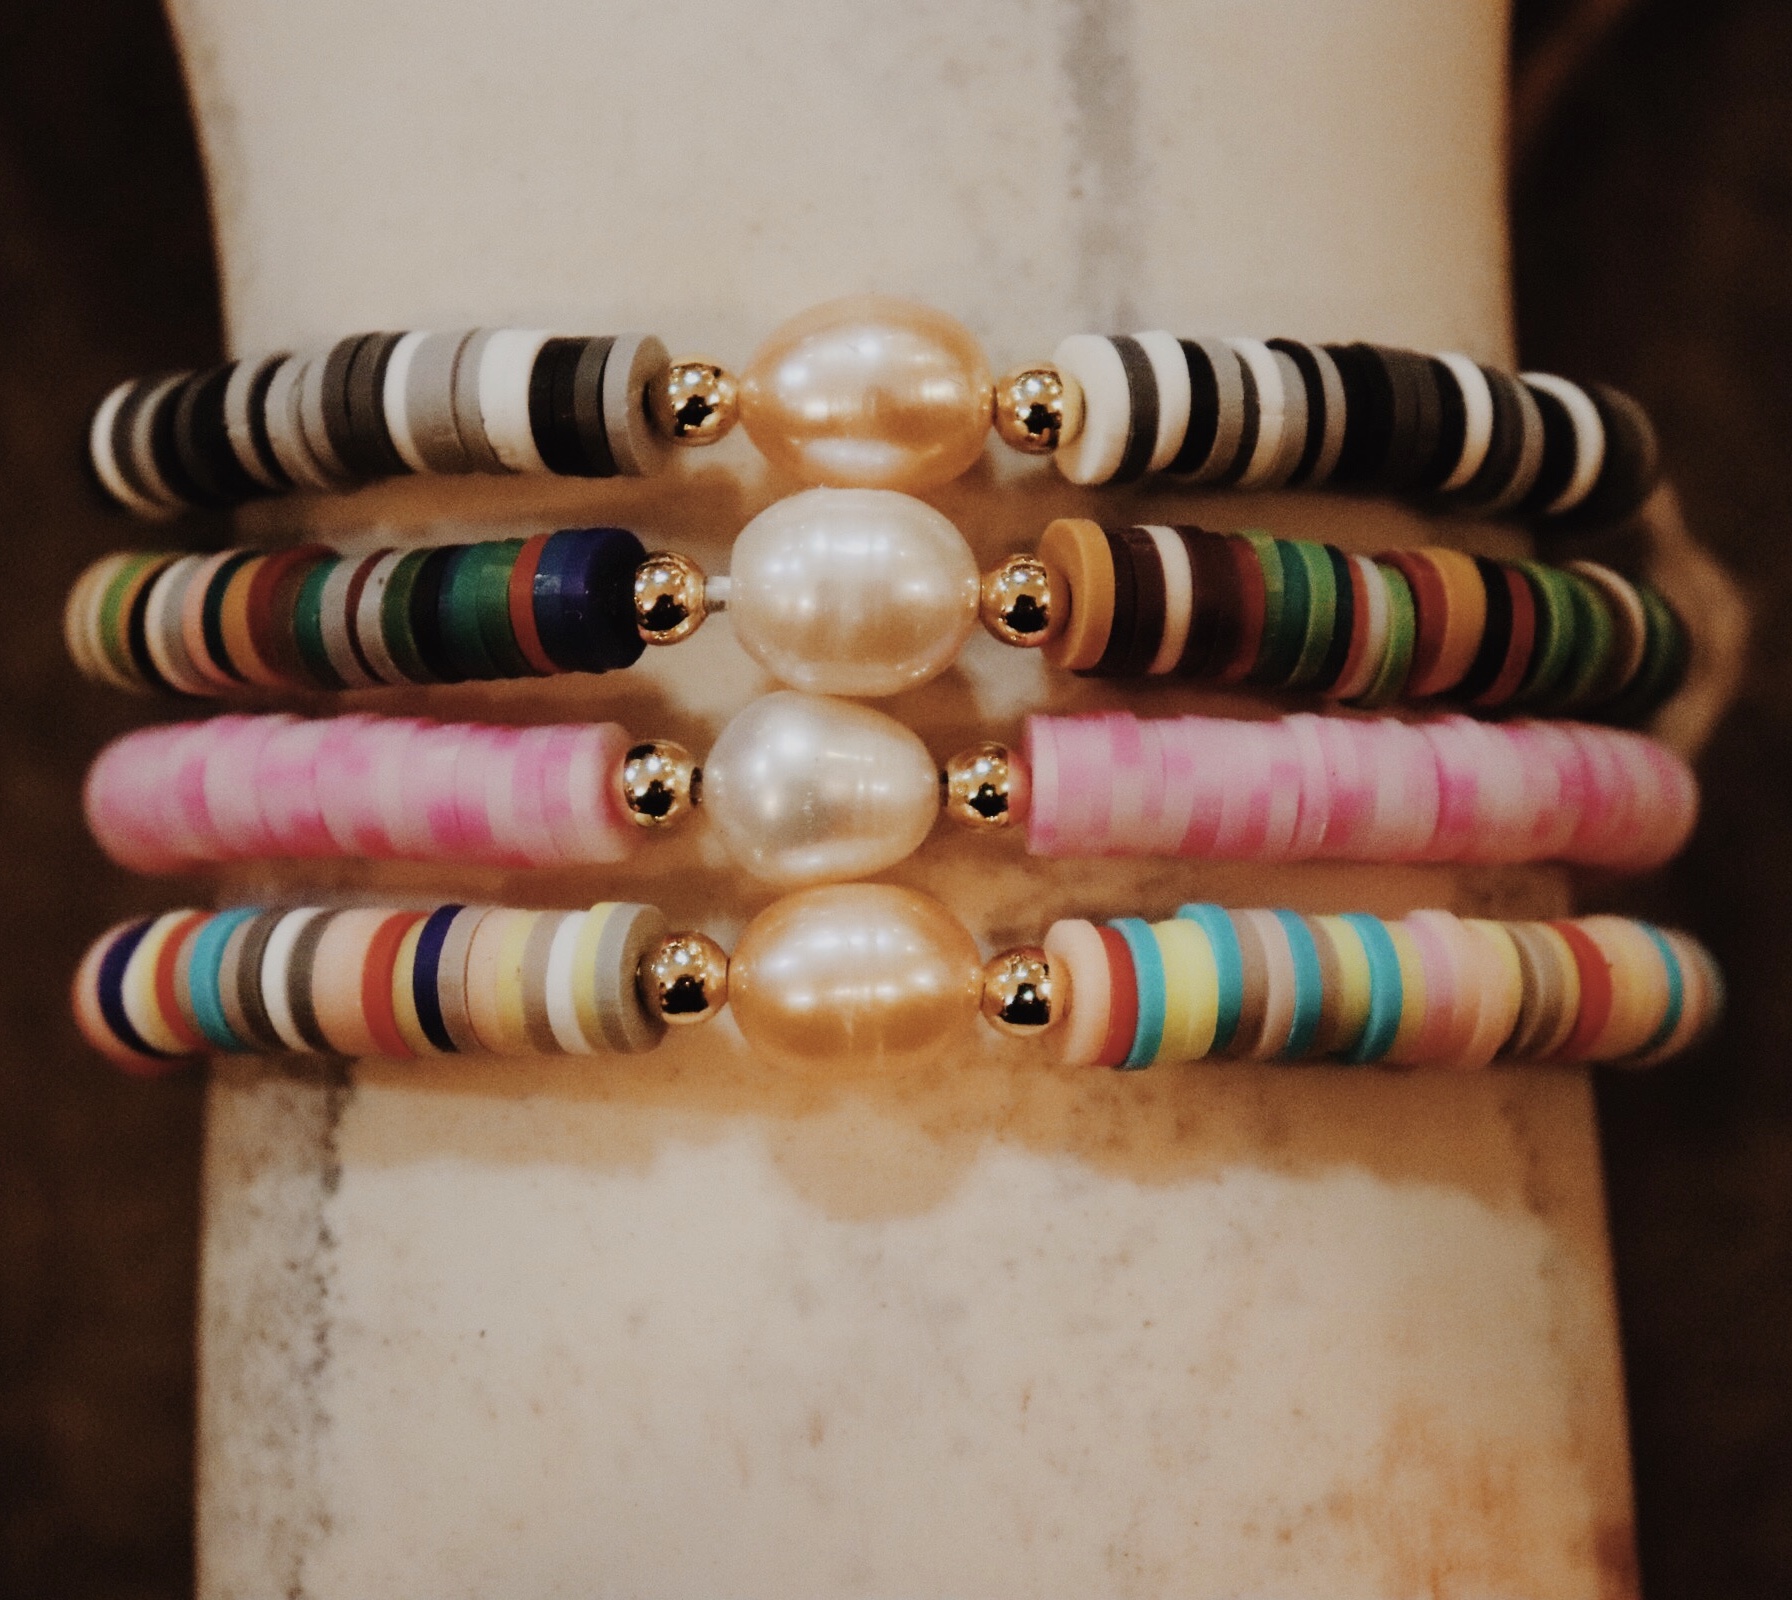 These Kelli Hawk Designs bracelets are stretchy with a pearl center!
Please select your color choice!